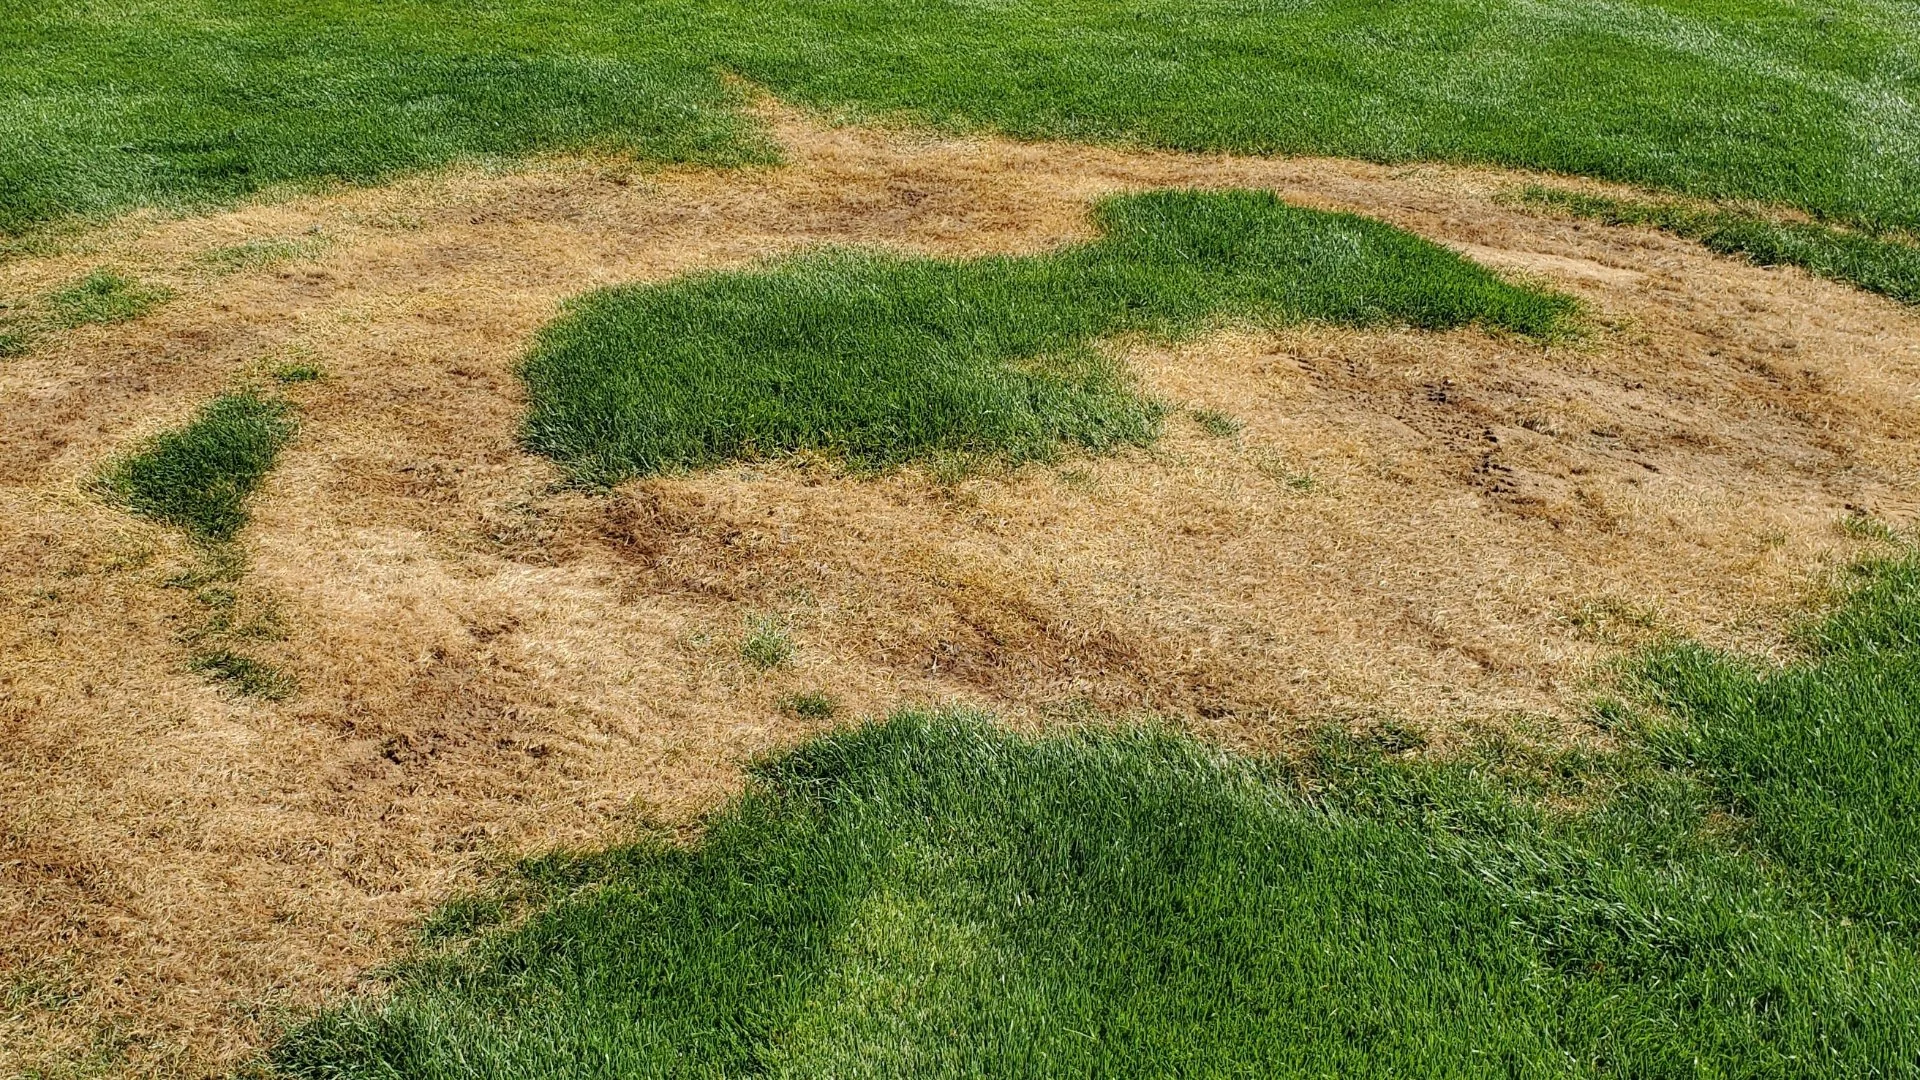 Lawn Diseases Are Usually the Result of Irrigation System Issues!